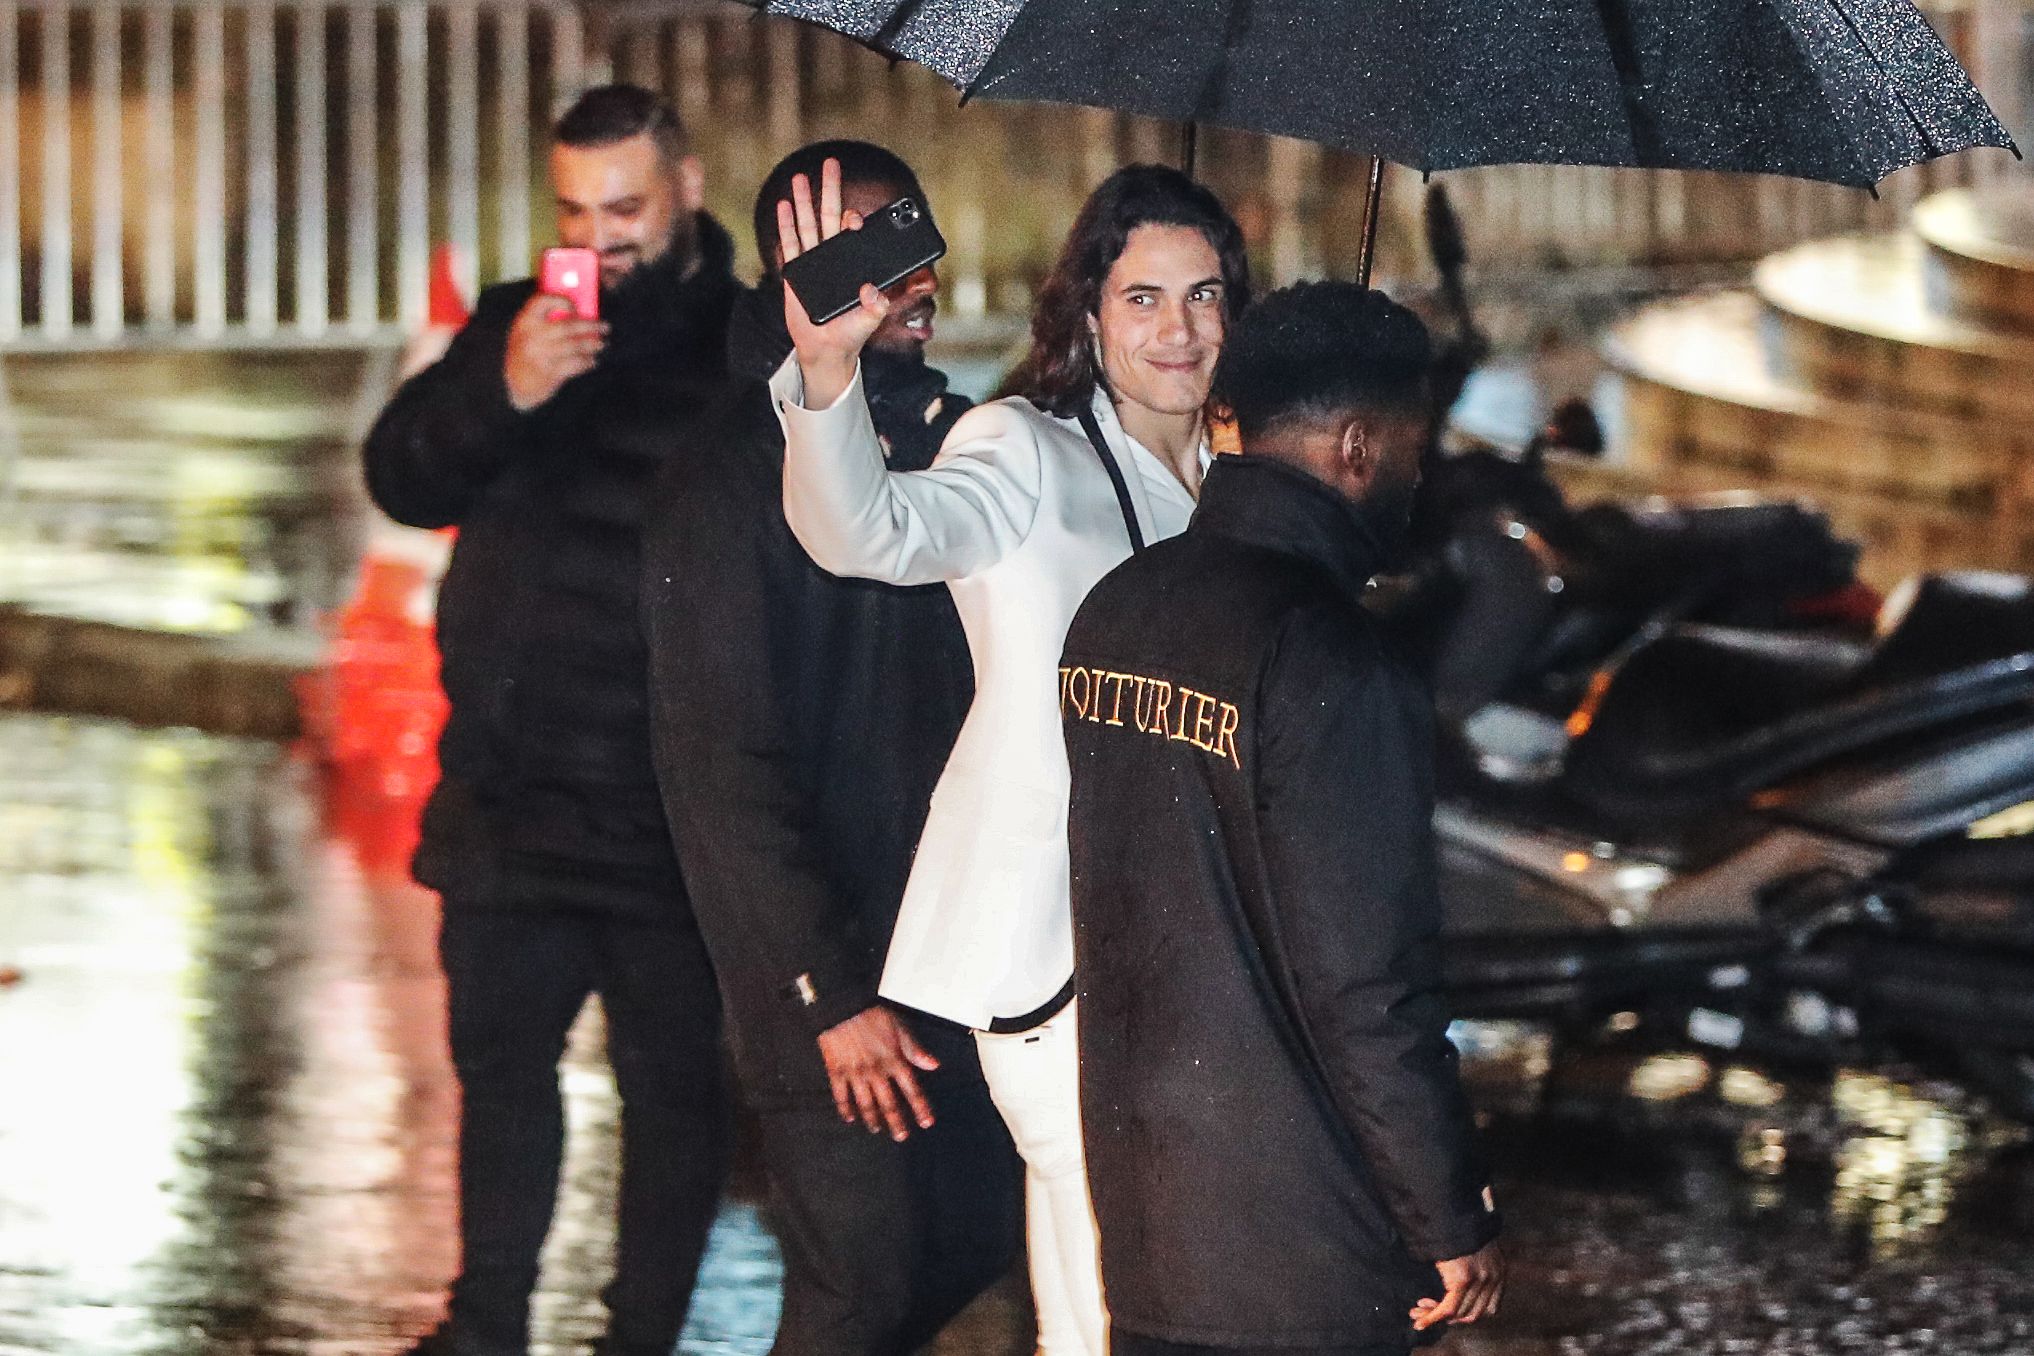 Cavani waves to fans even though he looks set to leave PSG